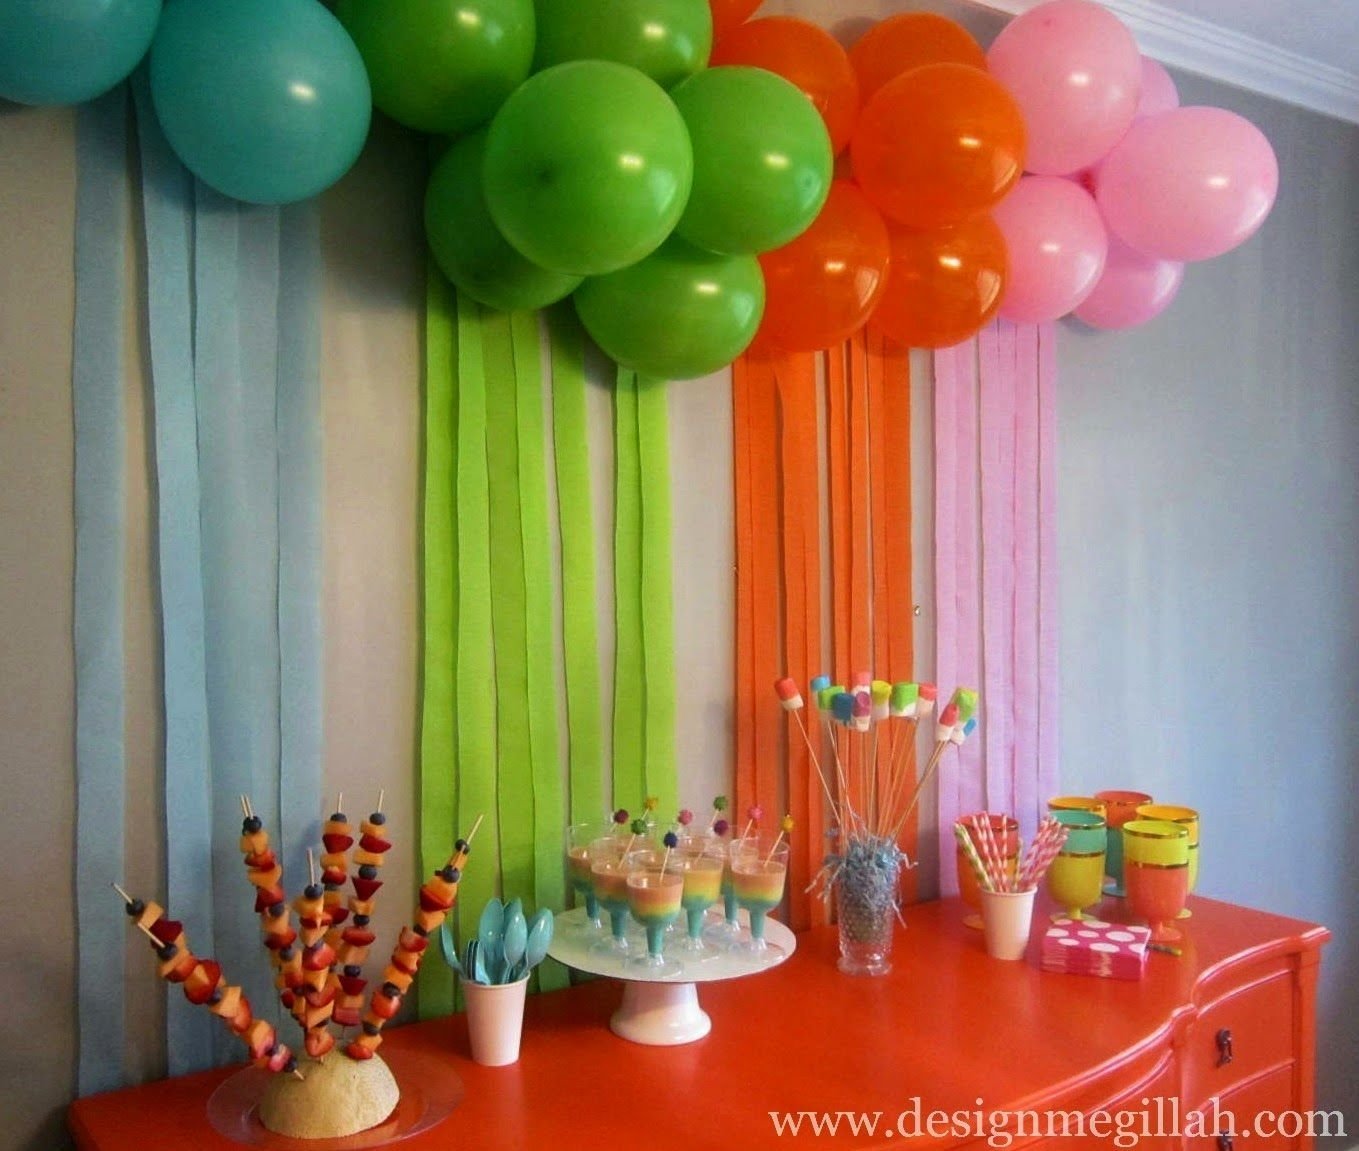 10 Cute Ideas For Birthday Parties At Home bday decoration ideas at home simple decorating party and supplies 2022